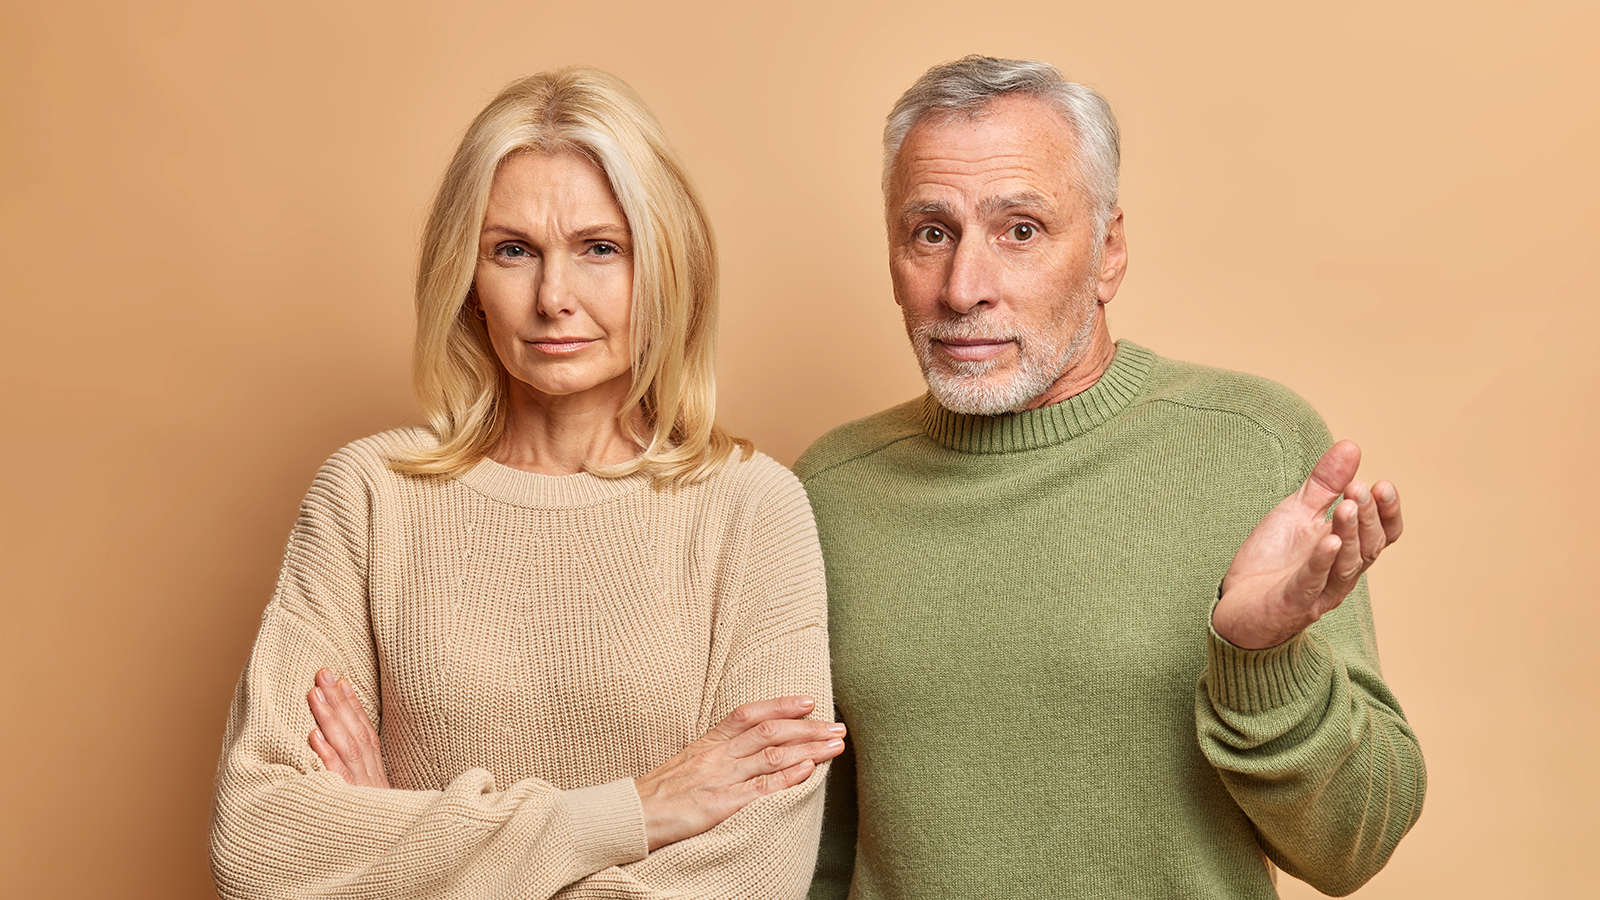 Self assured blonde middle aged woman stands with arms folded and looks seriously at camera her grey haired bearded husband shrugs shoulders in confusement being unaware. Family spouses indoor